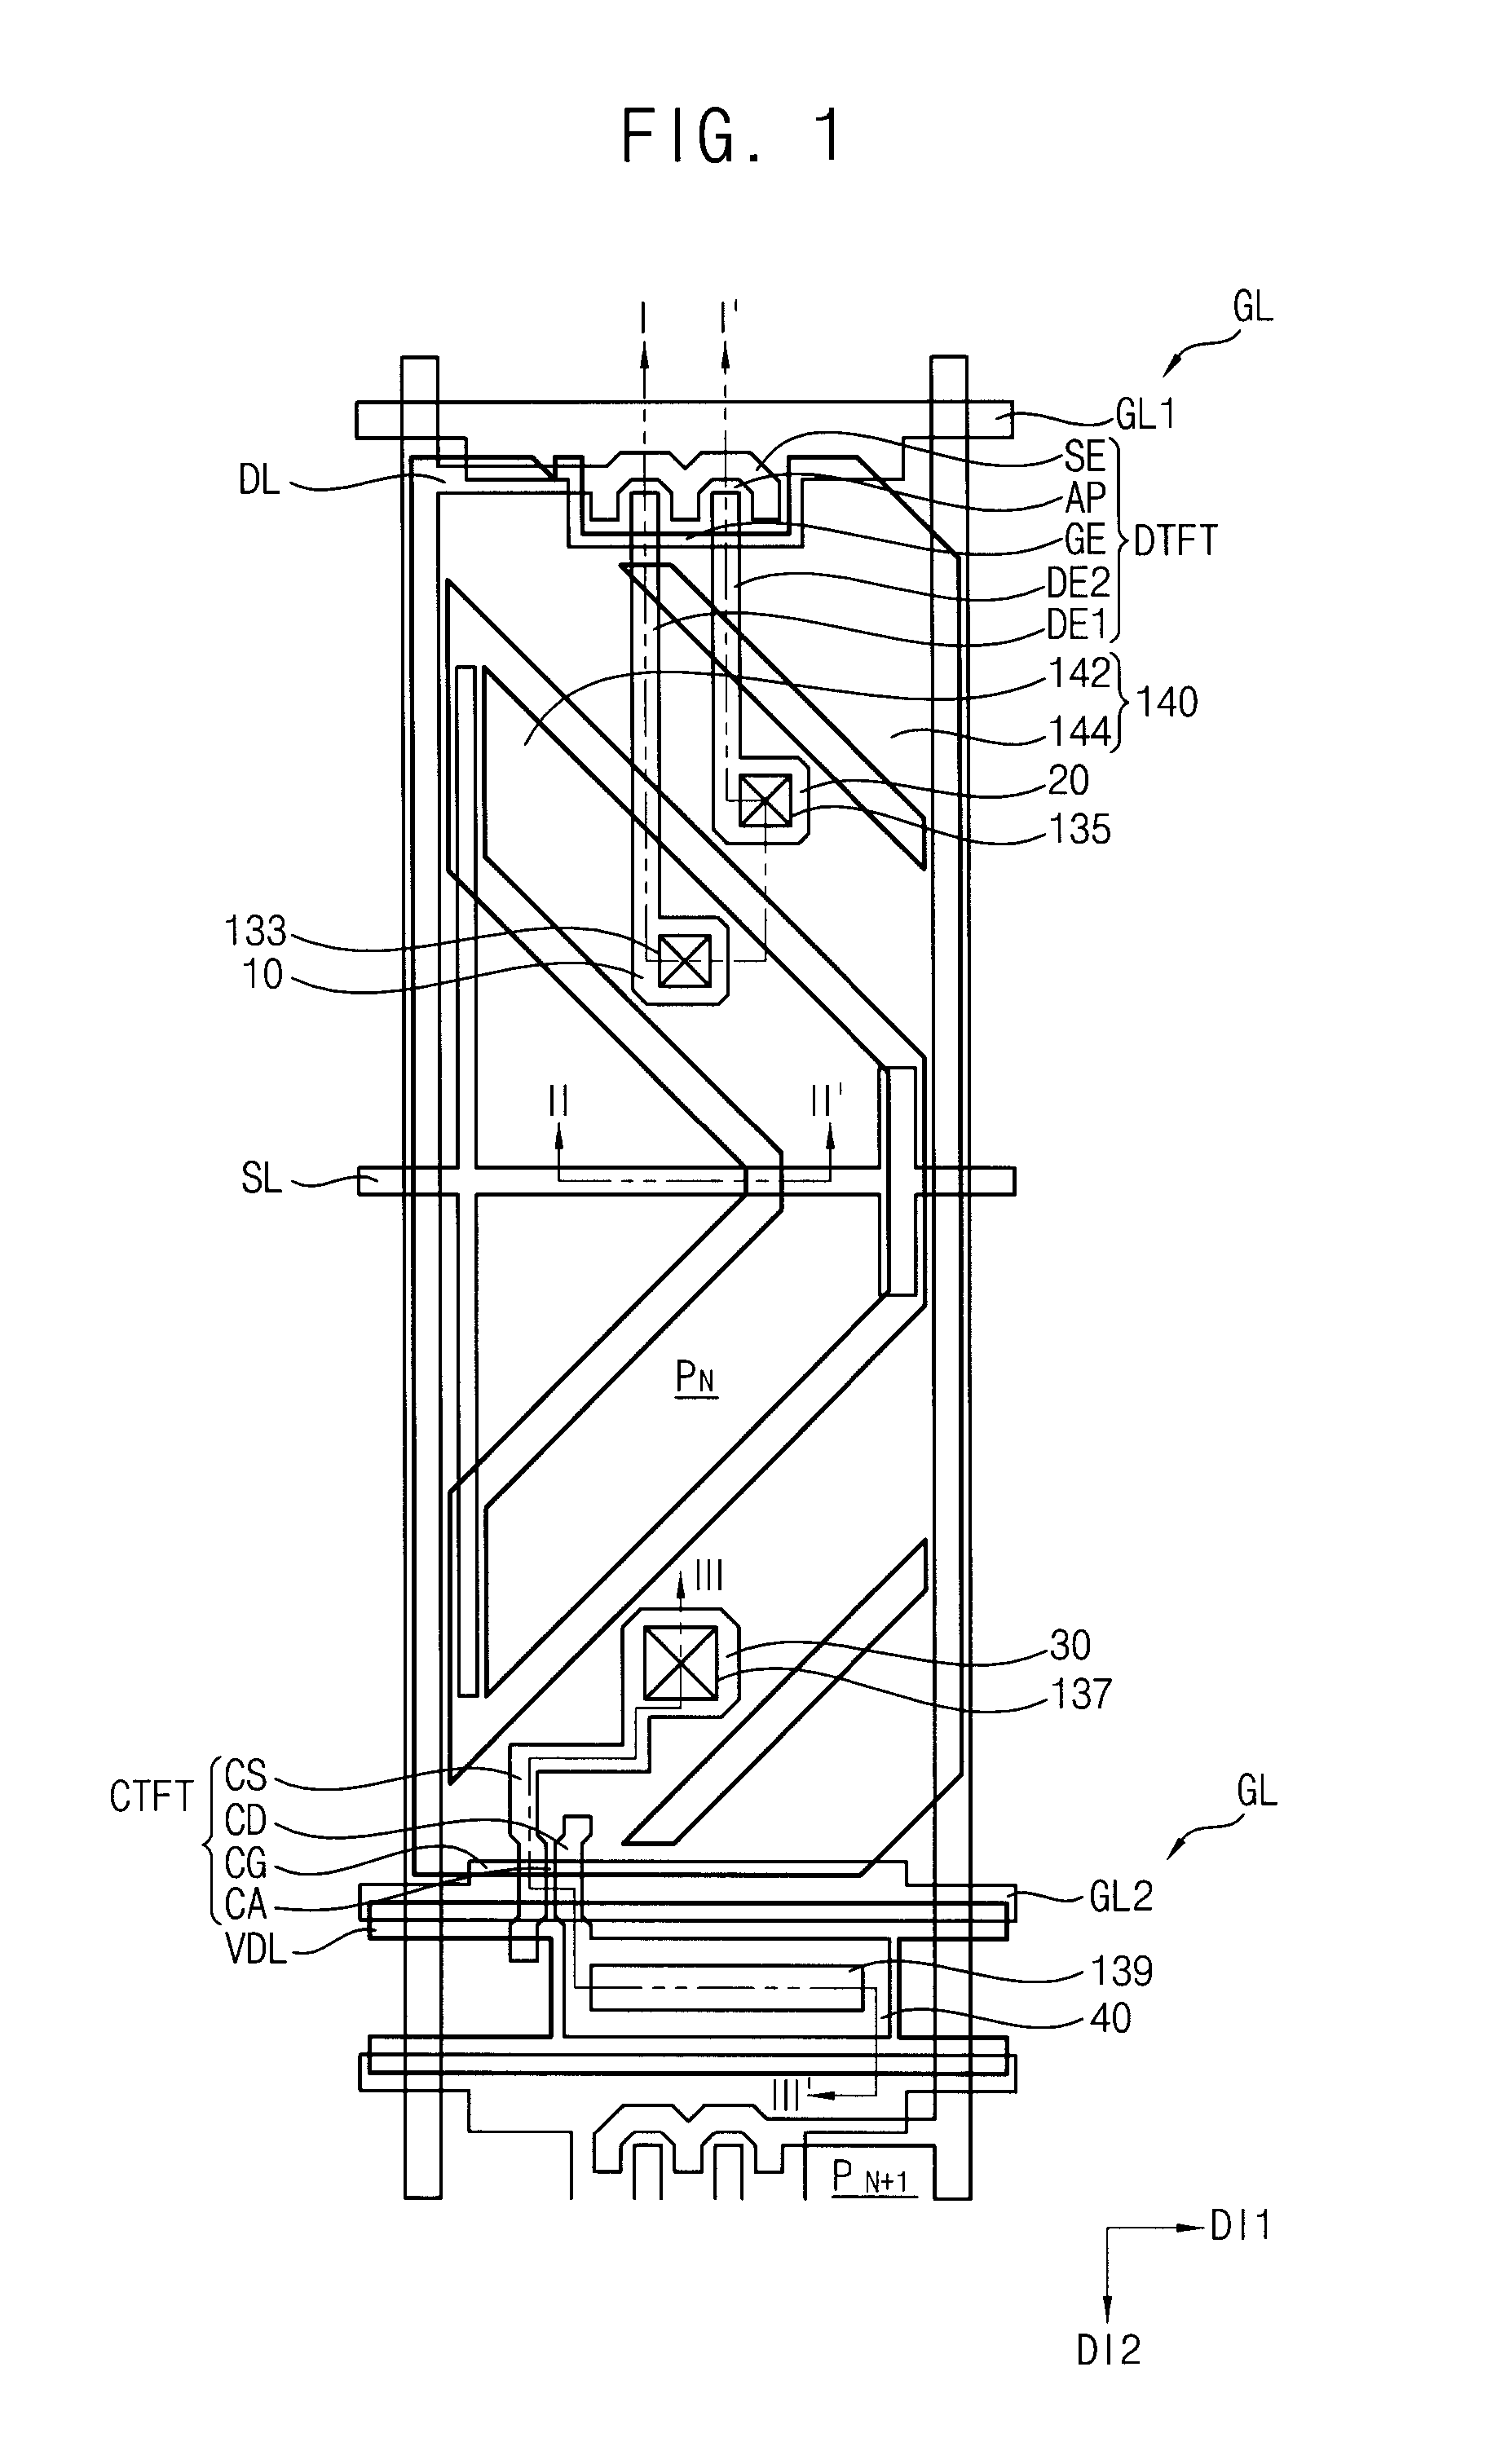 Display substrate, method of manufacturing the display substrate and display device having the display substrate